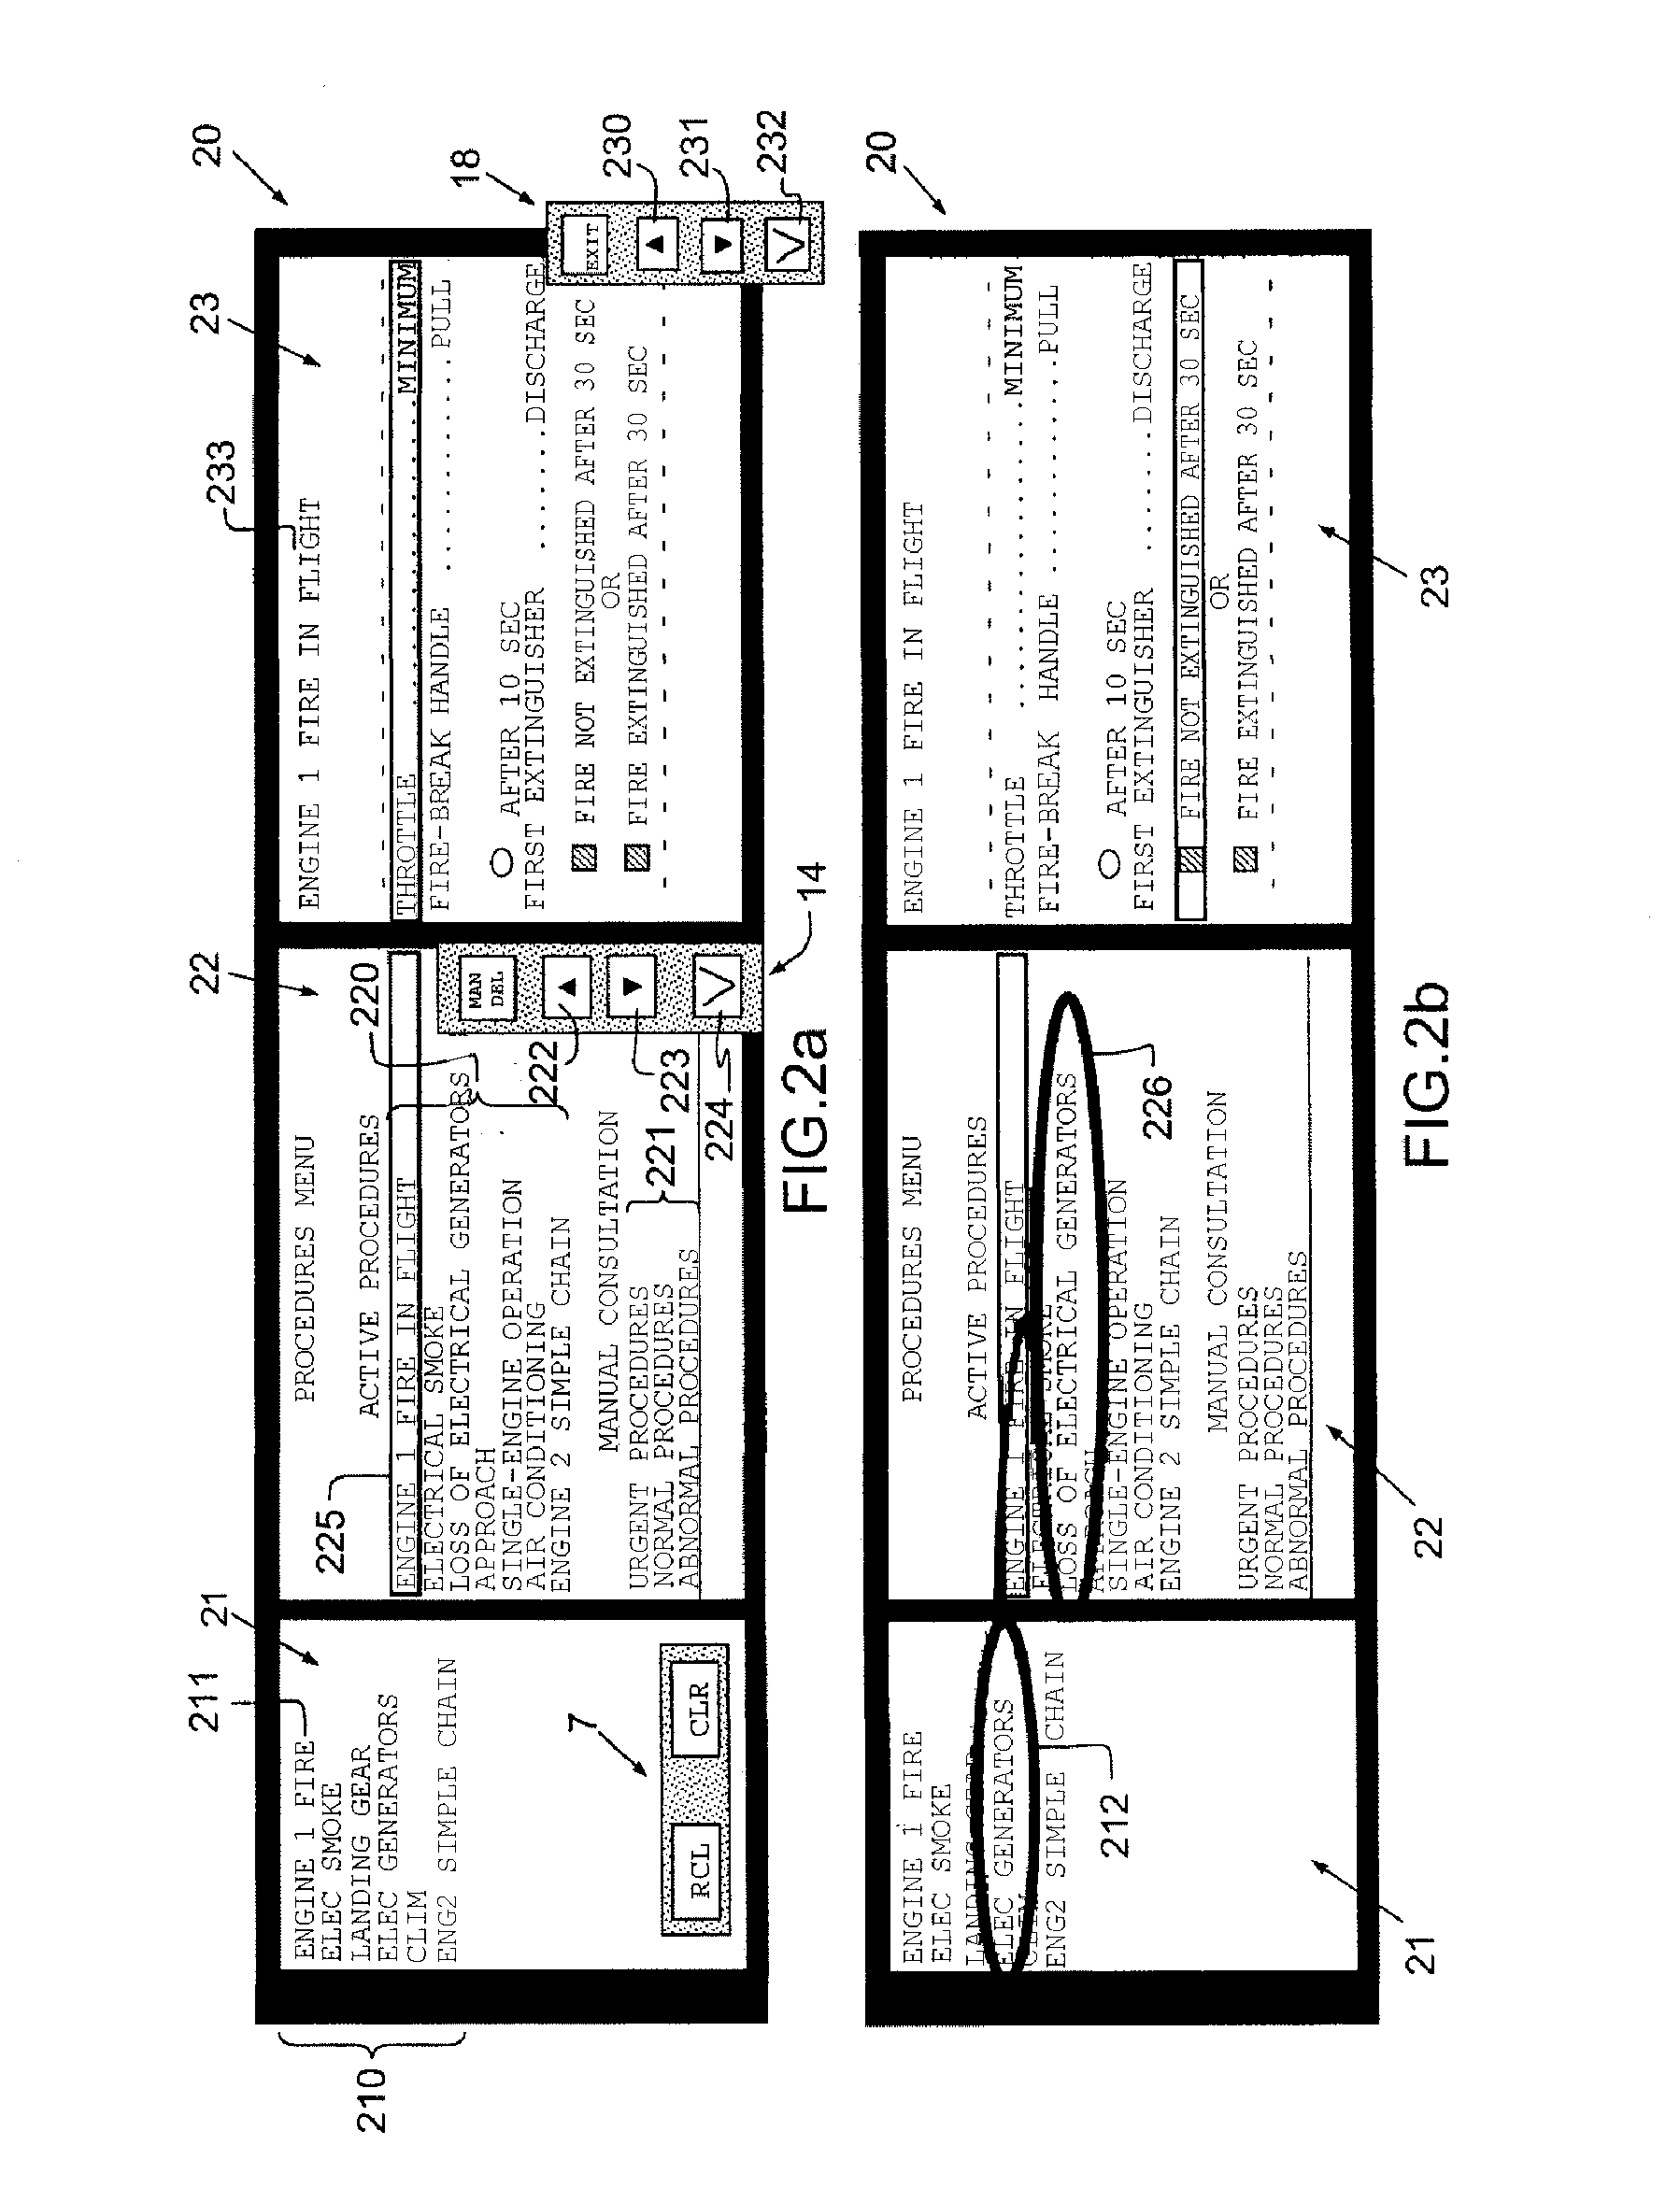 Device for managing piloting tasks carried out by a crew of an aircraft